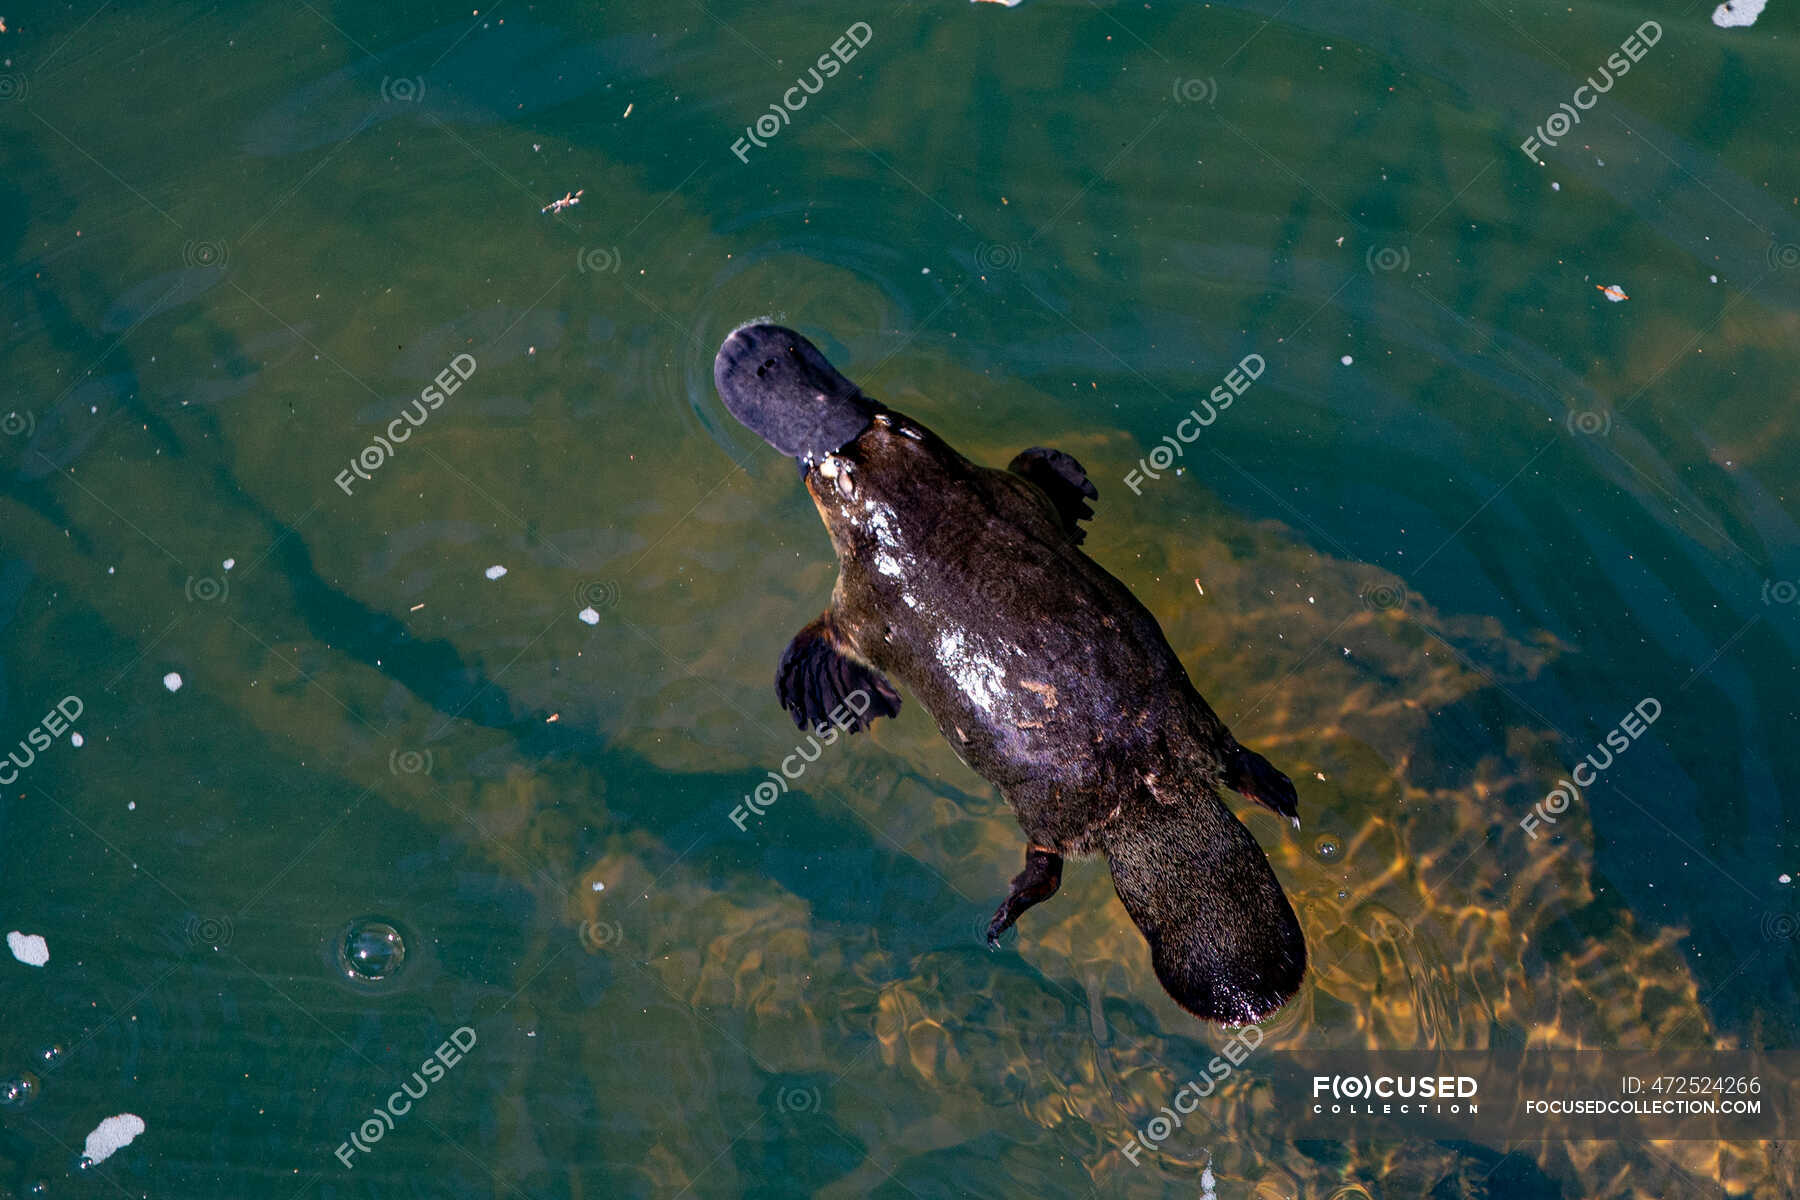 duck-billed-platypus-stock-photos-royalty-free-images-focused